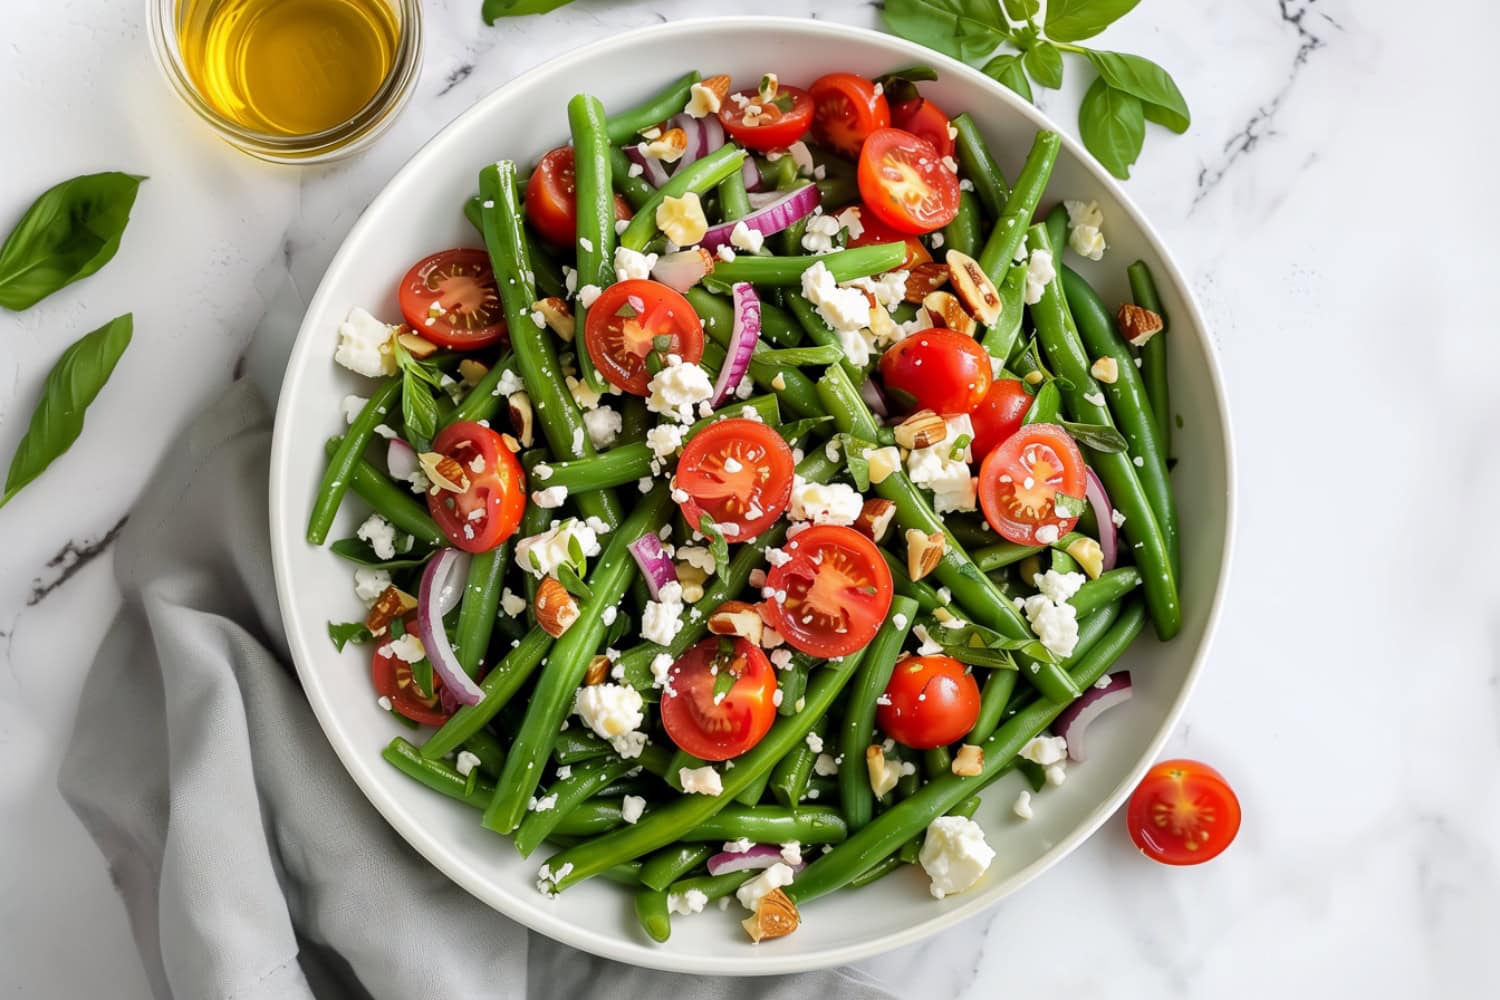 Easy and delicious homemade green bean salad with cherry tomatoes and crumbled feta.